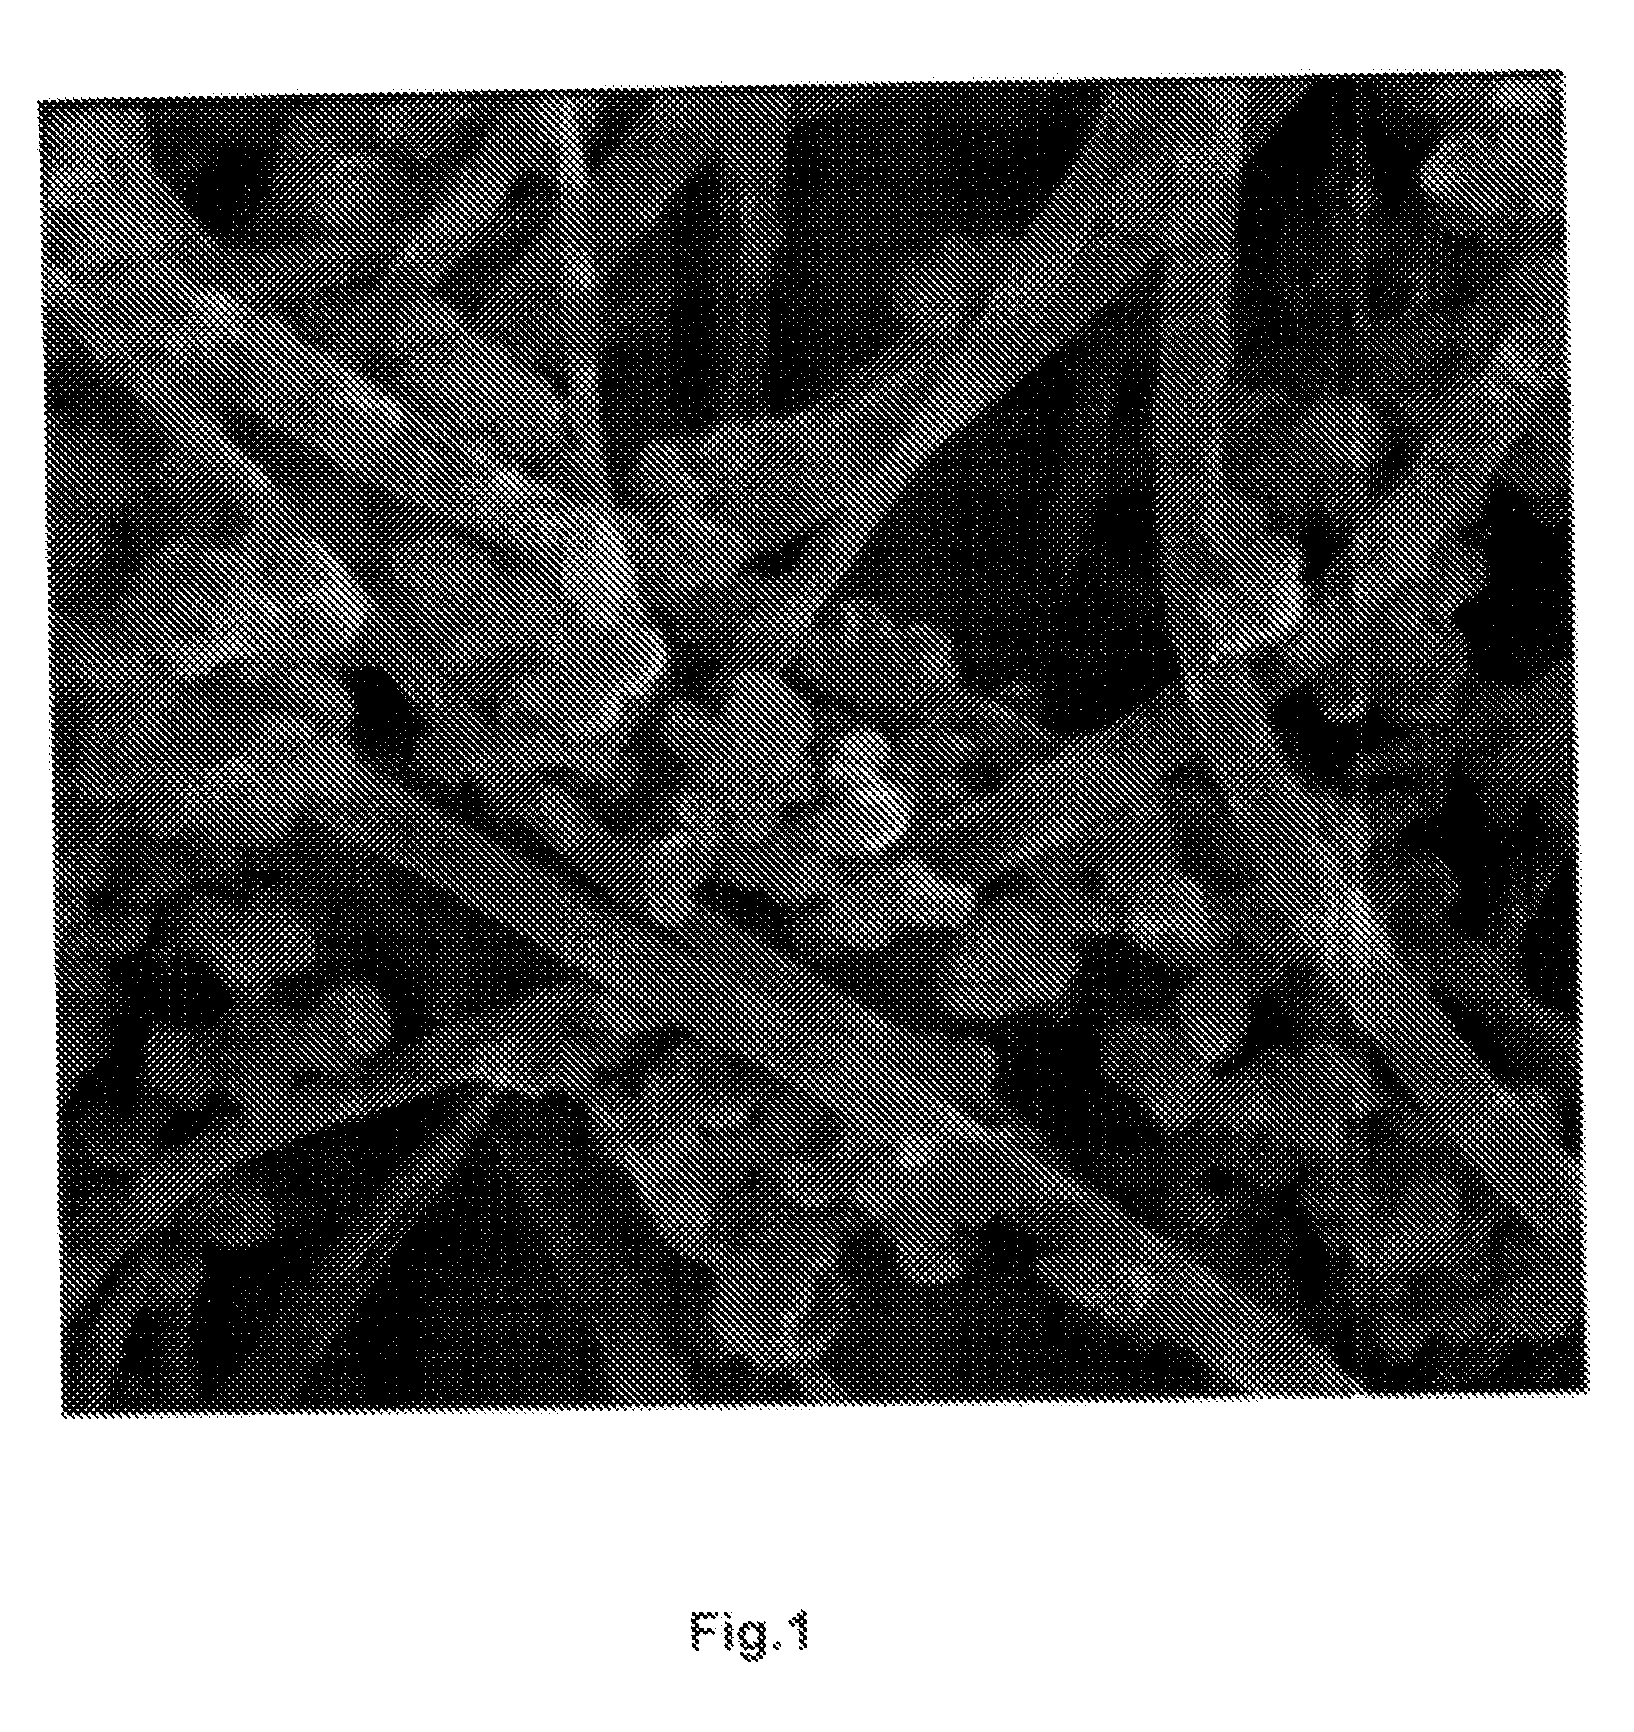 Filter material, method for the production thereof, a filter and filtering method